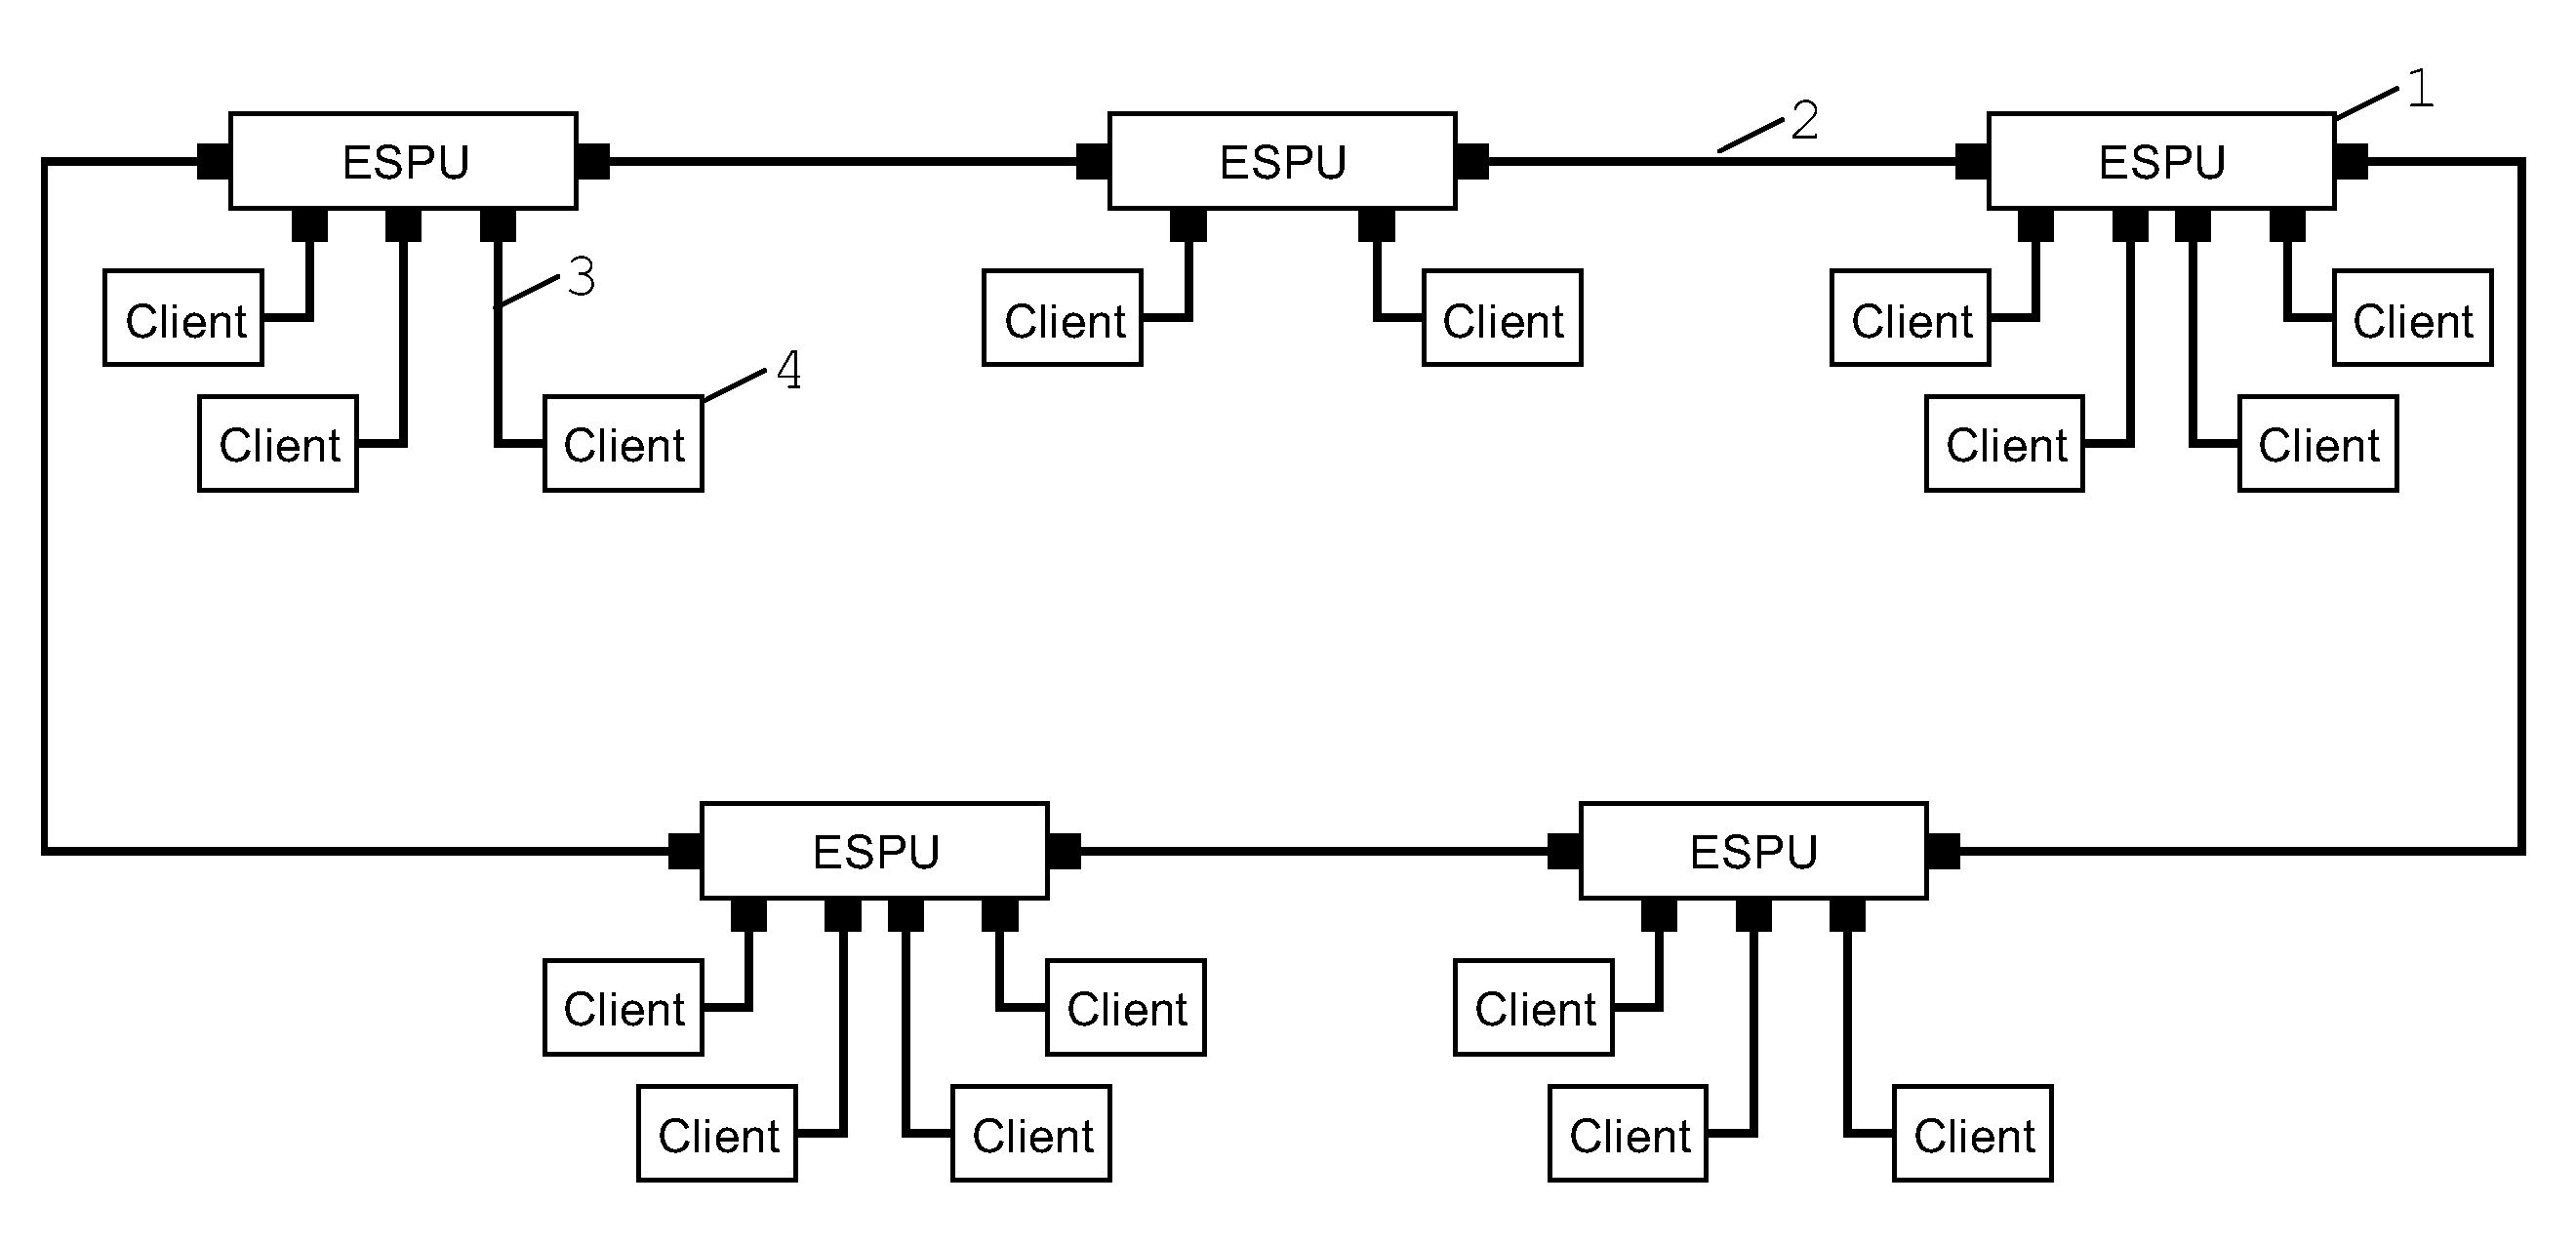 Method to provide connectivity and power for different aircraft sub-systems varying in levels of criticality and intended purposes while using a single partitioned Airborne Local Area Network (ALAN)